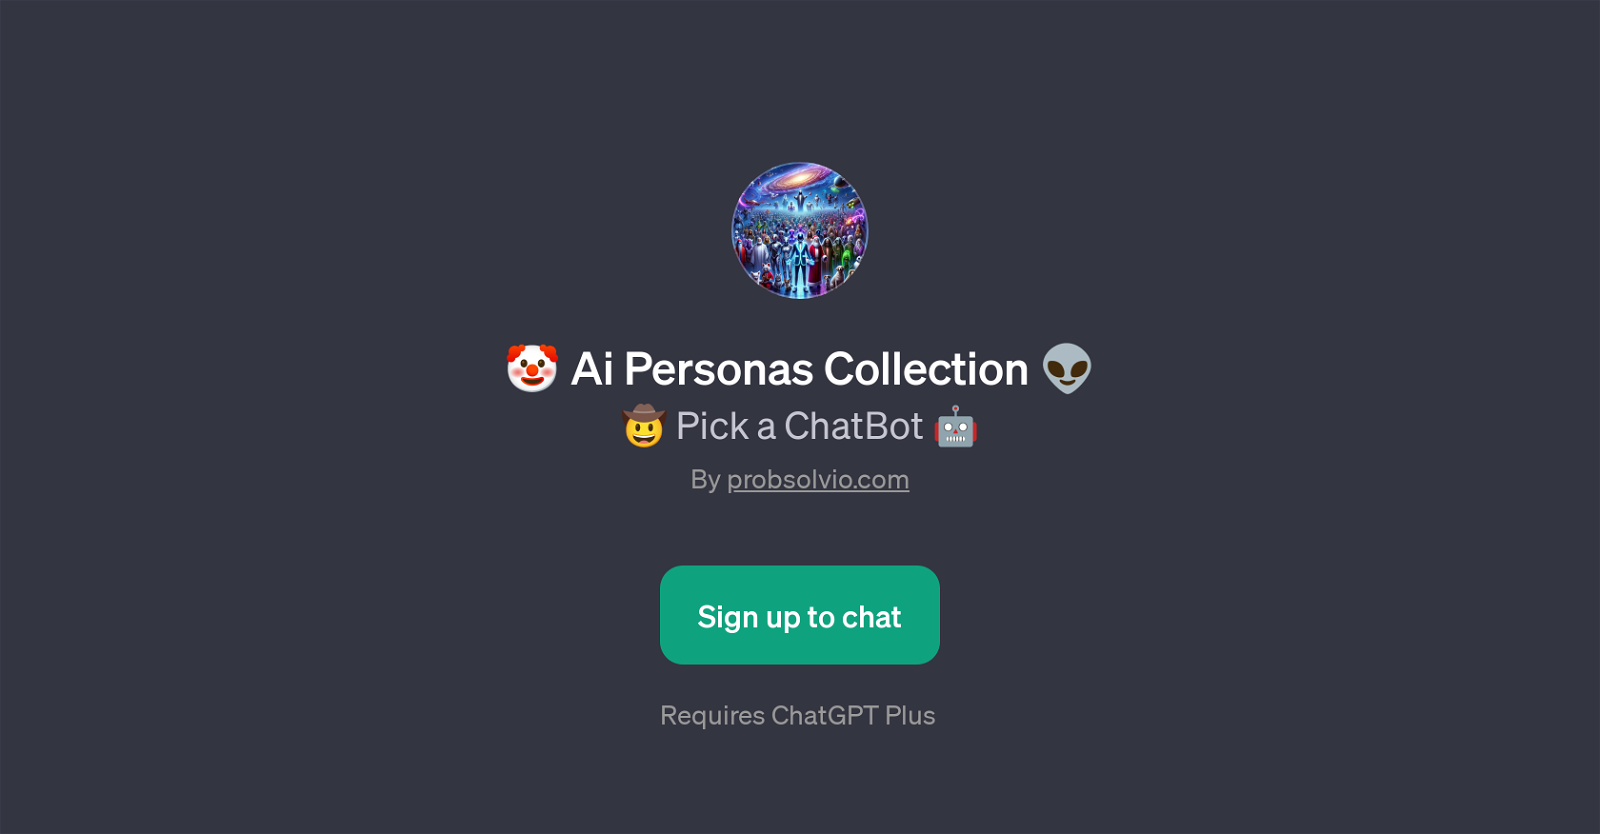 Ai Personas Collection website